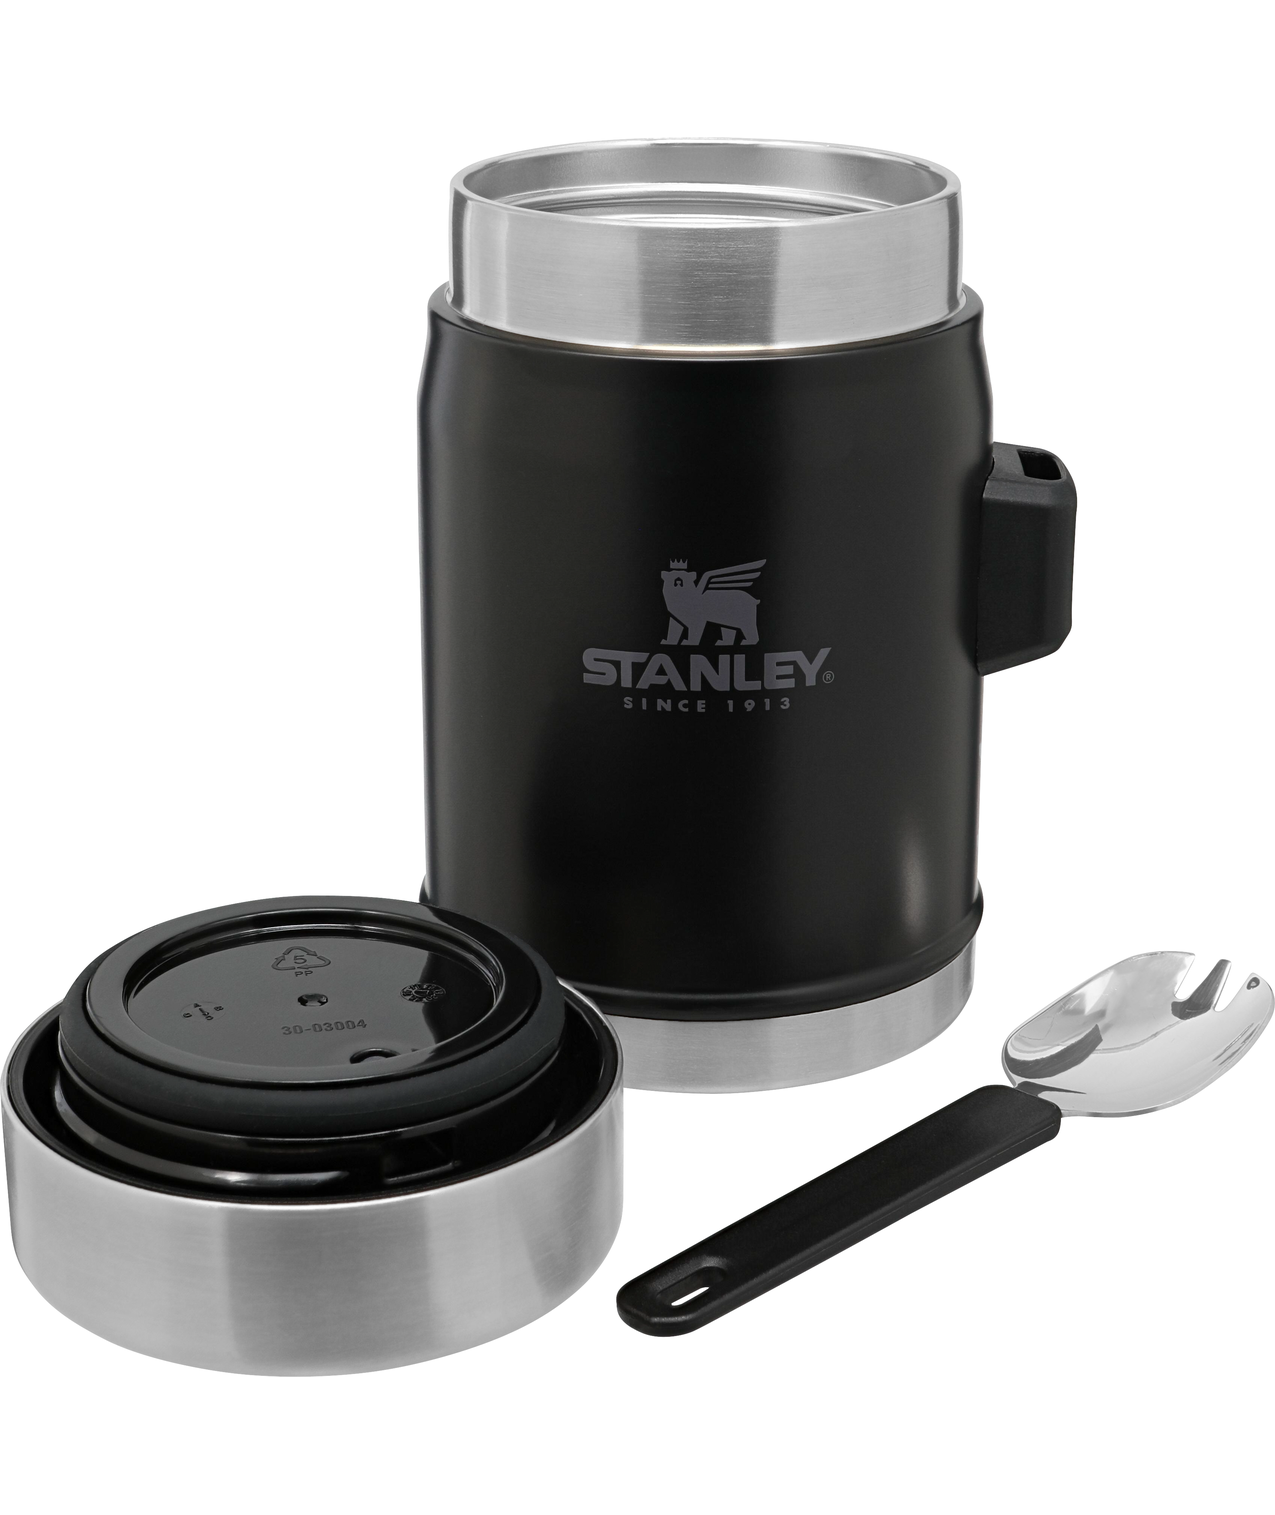 Leak-proof seven-hour heat retention vacuum food jar for camping or trips away by pro-equipment suppliers Stanley, featuring integrated steel spork and lifetime warranty.